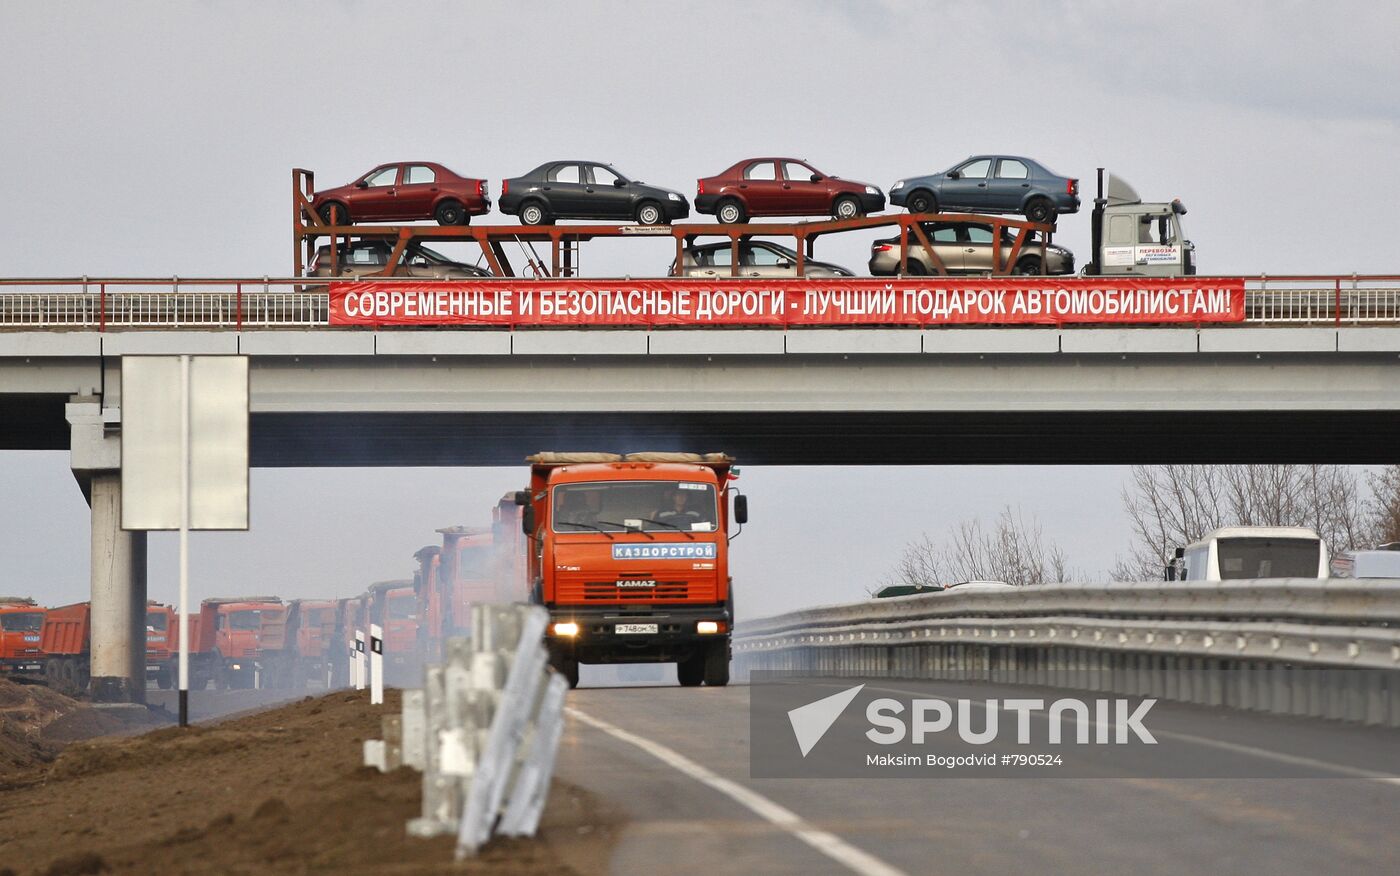 Europe - West China highway section opens in Tatarstan